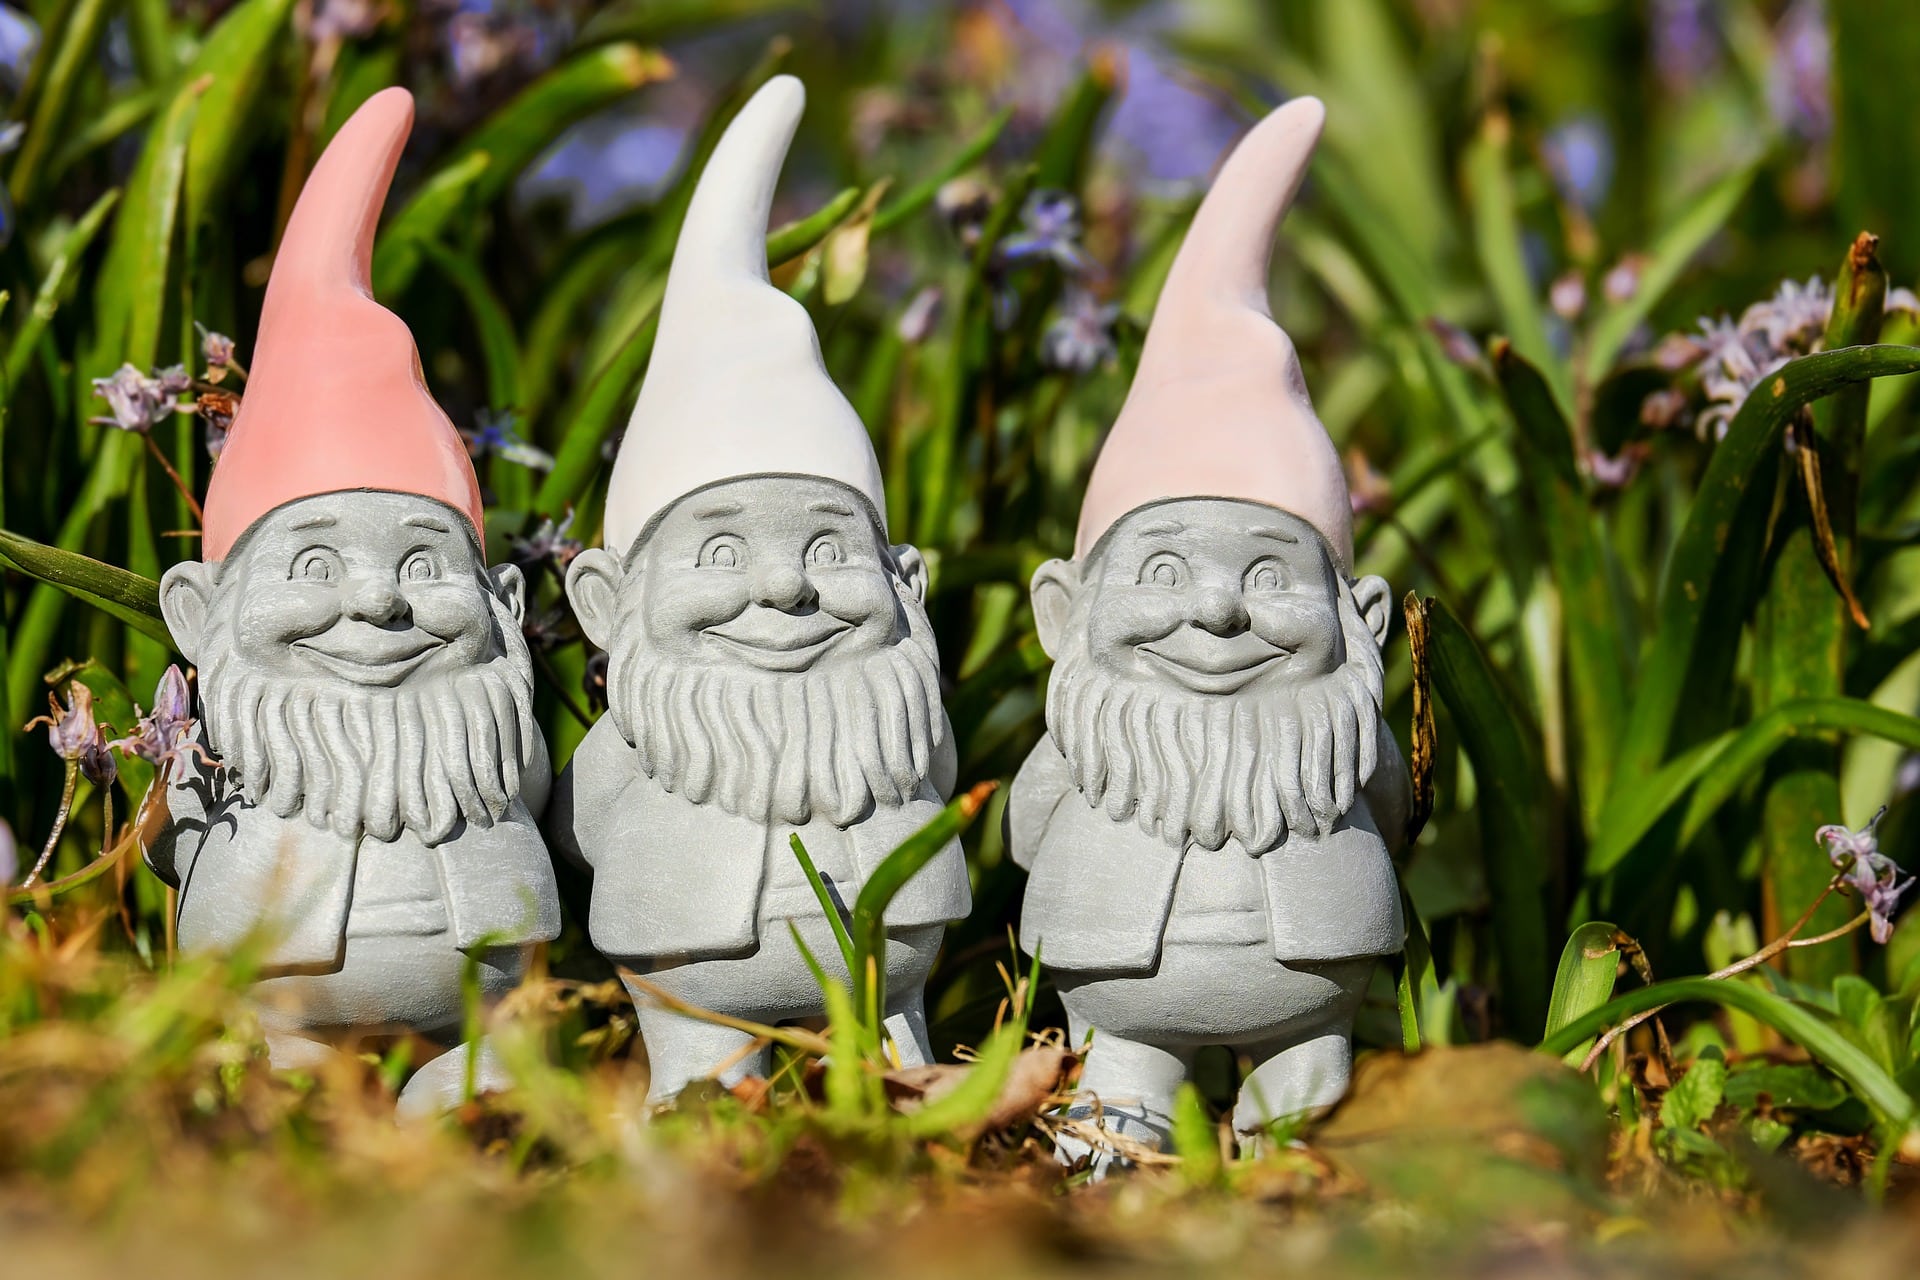 Three smiling garden gnomes stand for good neighbourliness